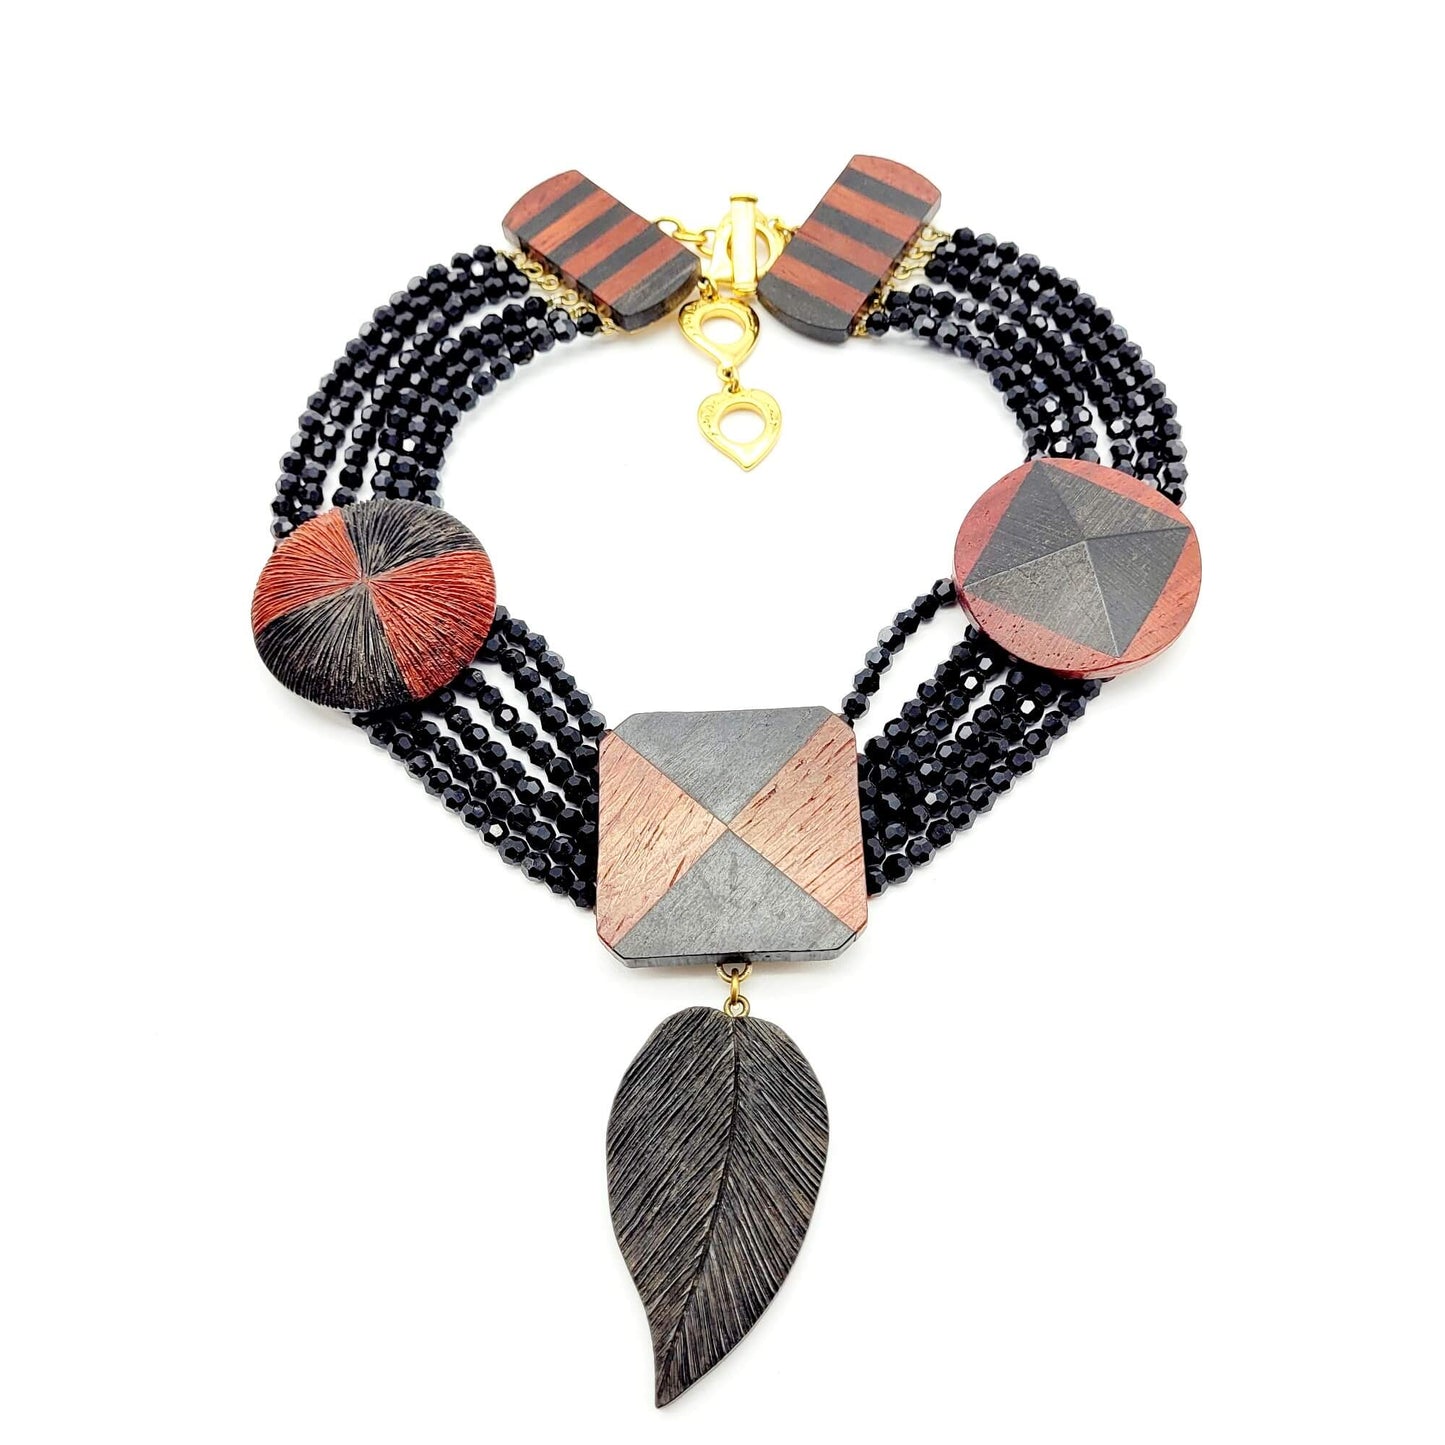 Rare Vintage Yves Saint Laurent Necklace With Bicolor Wooden Materials